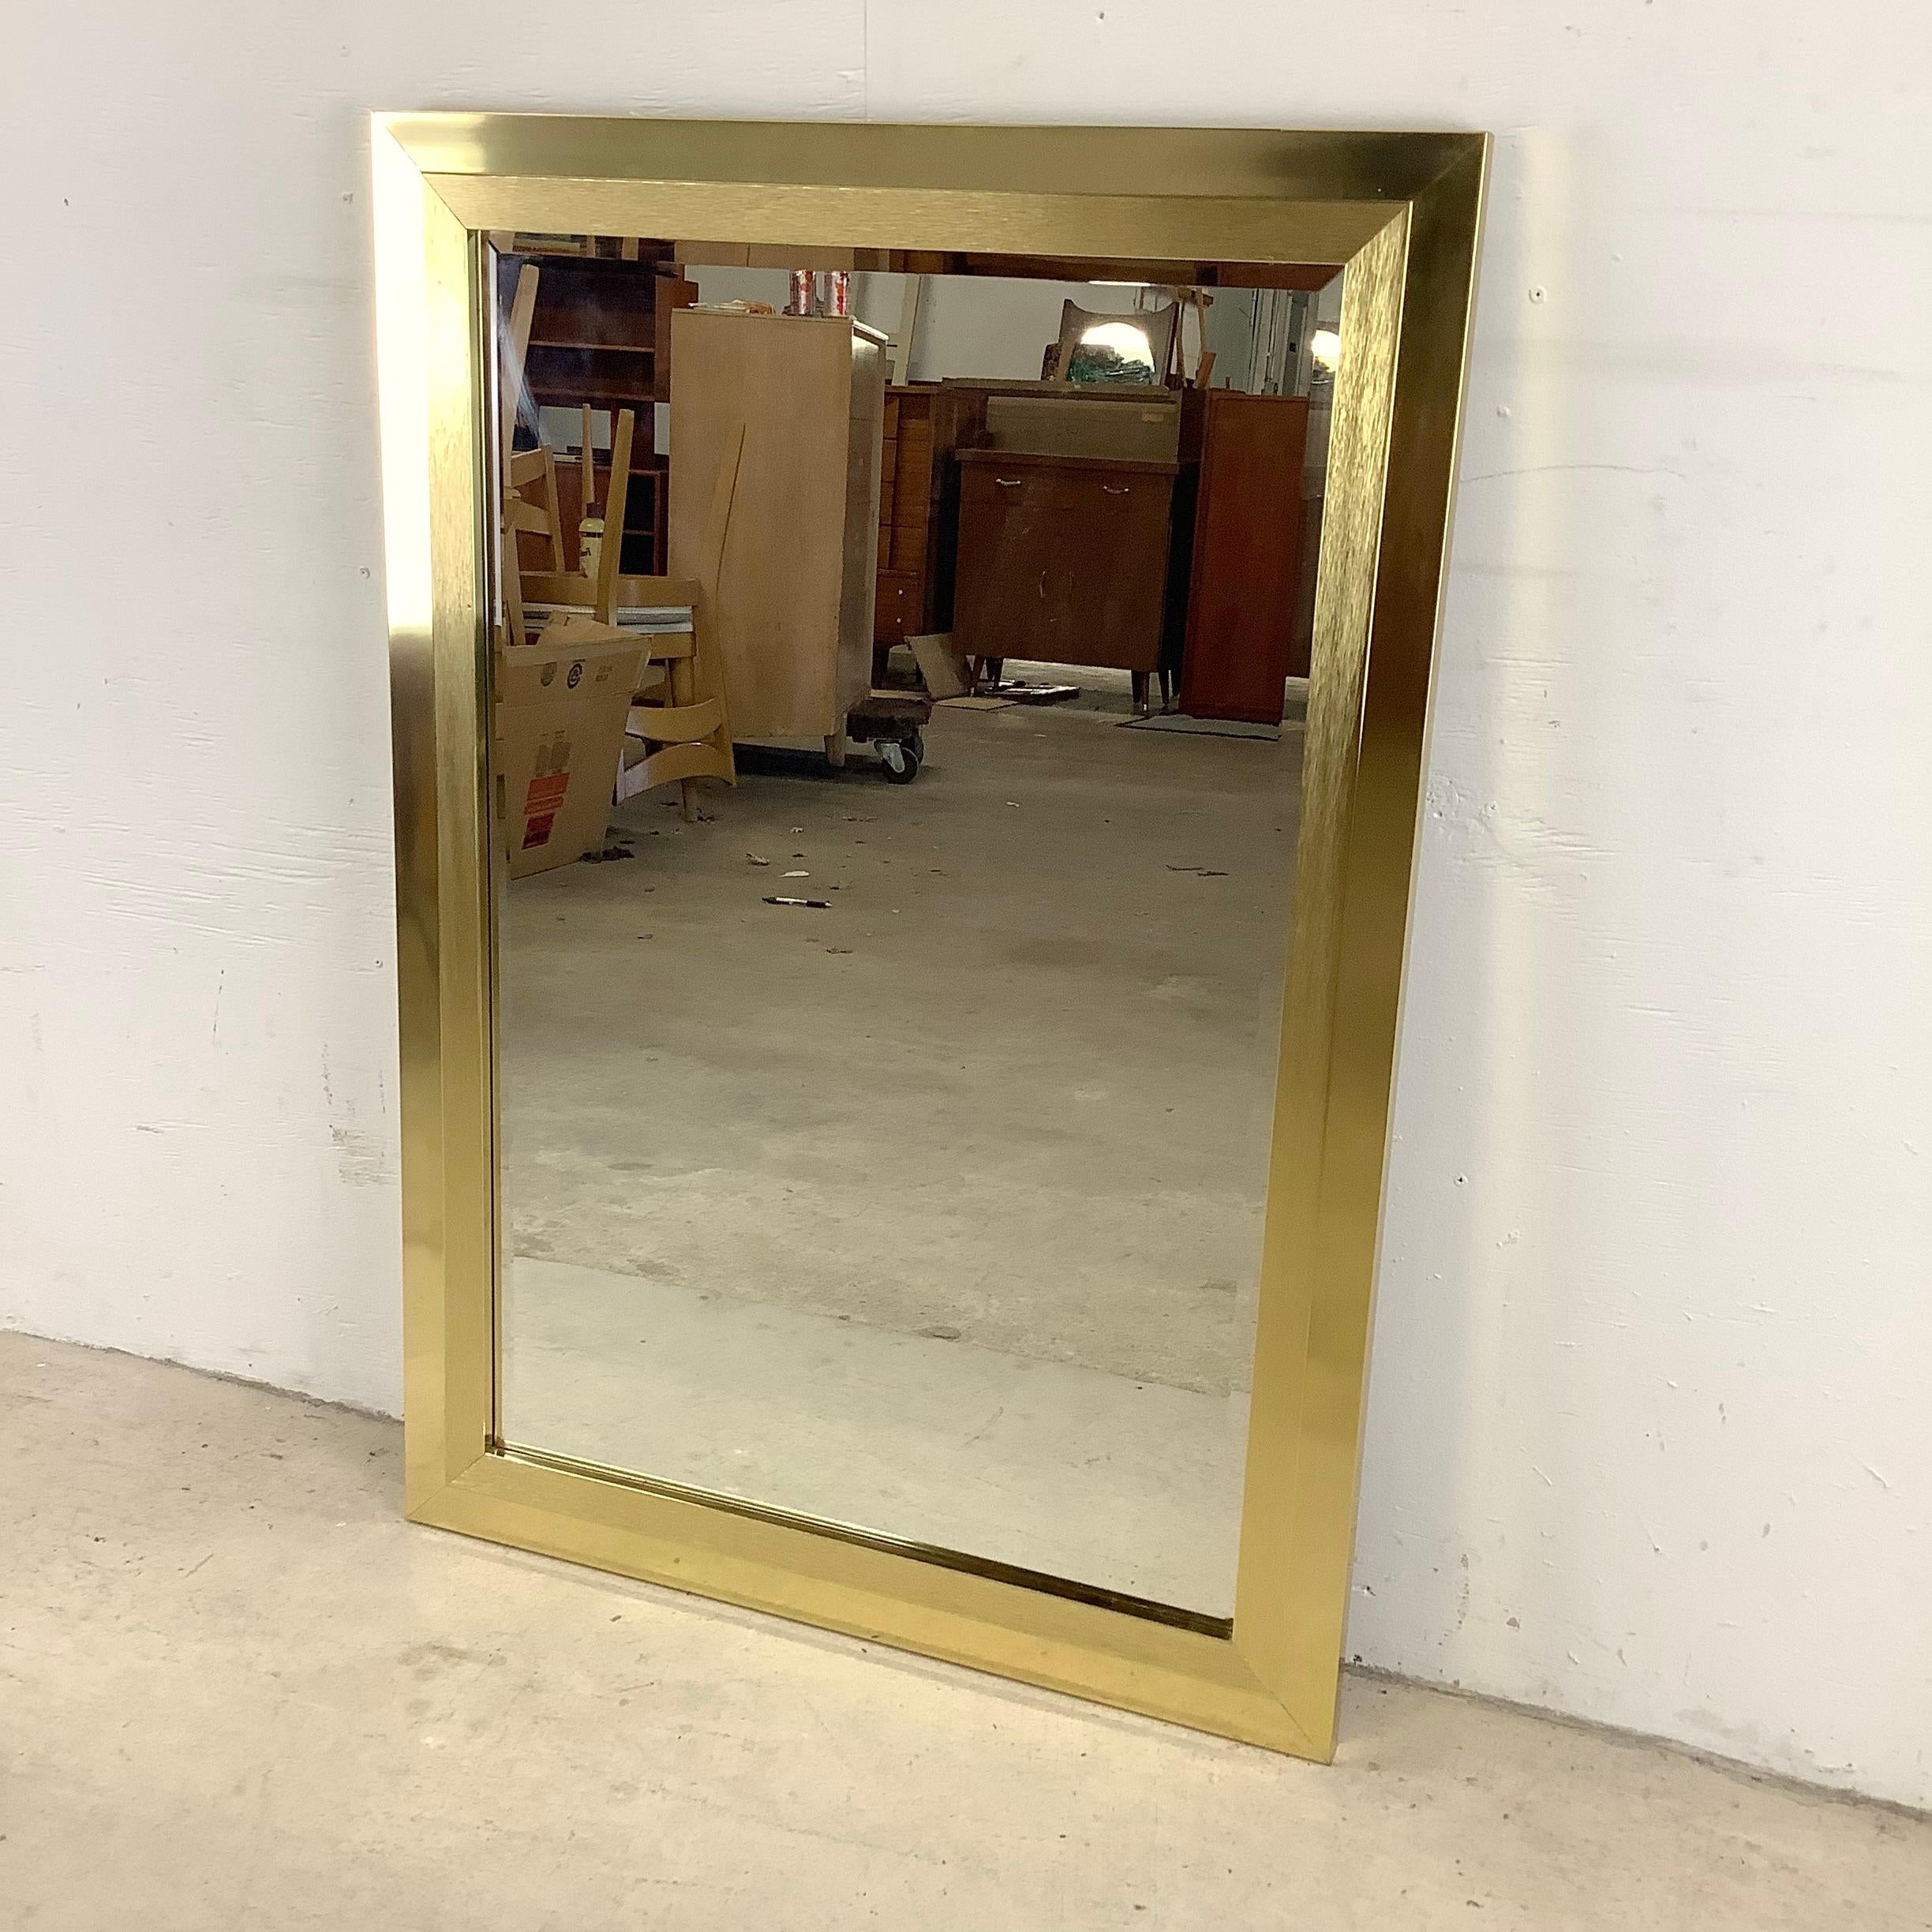 This striking vintage modern brass frame mirror comes ready to hang and adds subtle mcm style to any setting. The perfect size for vanity mirror. 

Dimensions: 29w 1d 41.25h

Condition: age appropriate wear, vintage finish worn,